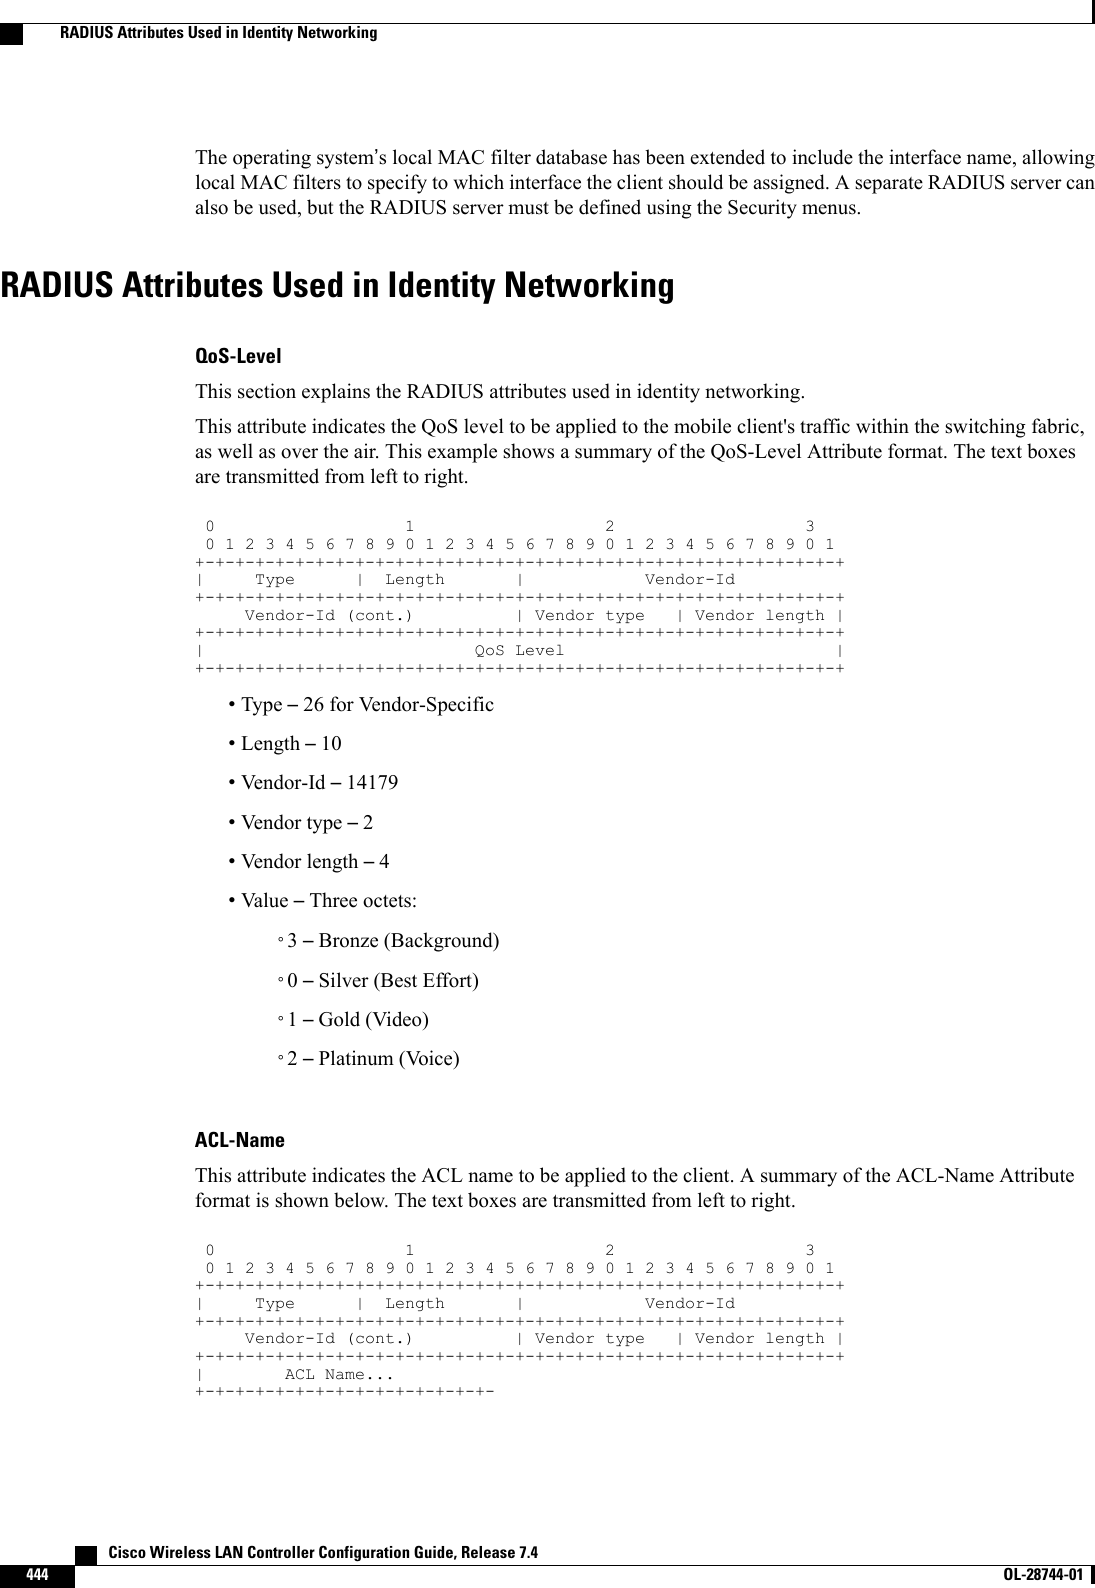 The operating system’s local MAC filter database has been extended to include the interface name, allowinglocal MAC filters to specify to which interface the client should be assigned. A separate RADIUS server canalso be used, but the RADIUS server must be defined using the Security menus.RADIUS Attributes Used in Identity NetworkingQoS-LevelThis section explains the RADIUS attributes used in identity networking.This attribute indicates the QoS level to be applied to the mobile client&apos;s traffic within the switching fabric,as well as over the air. This example shows a summary of the QoS-Level Attribute format. The text boxesare transmitted from left to right.012301234567890123456789012345678901+-+-+-+-+-+-+-+-+-+-+-+-+-+-+-+-+-+-+-+-+-+-+-+-+-+-+-+-+-+-+-+-+| Type | Length | Vendor-Id+-+-+-+-+-+-+-+-+-+-+-+-+-+-+-+-+-+-+-+-+-+-+-+-+-+-+-+-+-+-+-+-+Vendor-Id (cont.) | Vendor type | Vendor length |+-+-+-+-+-+-+-+-+-+-+-+-+-+-+-+-+-+-+-+-+-+-+-+-+-+-+-+-+-+-+-+-+| QoS Level |+-+-+-+-+-+-+-+-+-+-+-+-+-+-+-+-+-+-+-+-+-+-+-+-+-+-+-+-+-+-+-+-+•Type –26 for Vendor-Specific•Length –10•Vendor-Id –14179•Vendor type –2•Vendor length –4•Value –Three octets:◦3–Bronze (Background)◦0–Silver (Best Effort)◦1–Gold (Video)◦2–Platinum (Voice)ACL-NameThis attribute indicates the ACL name to be applied to the client. A summary of the ACL-Name Attributeformat is shown below. The text boxes are transmitted from left to right.012301234567890123456789012345678901+-+-+-+-+-+-+-+-+-+-+-+-+-+-+-+-+-+-+-+-+-+-+-+-+-+-+-+-+-+-+-+-+| Type | Length | Vendor-Id+-+-+-+-+-+-+-+-+-+-+-+-+-+-+-+-+-+-+-+-+-+-+-+-+-+-+-+-+-+-+-+-+Vendor-Id (cont.) | Vendor type | Vendor length |+-+-+-+-+-+-+-+-+-+-+-+-+-+-+-+-+-+-+-+-+-+-+-+-+-+-+-+-+-+-+-+-+| ACL Name...+-+-+-+-+-+-+-+-+-+-+-+-+-+-+-   Cisco Wireless LAN Controller Configuration Guide, Release 7.4444 OL-28744-01  RADIUS Attributes Used in Identity Networking